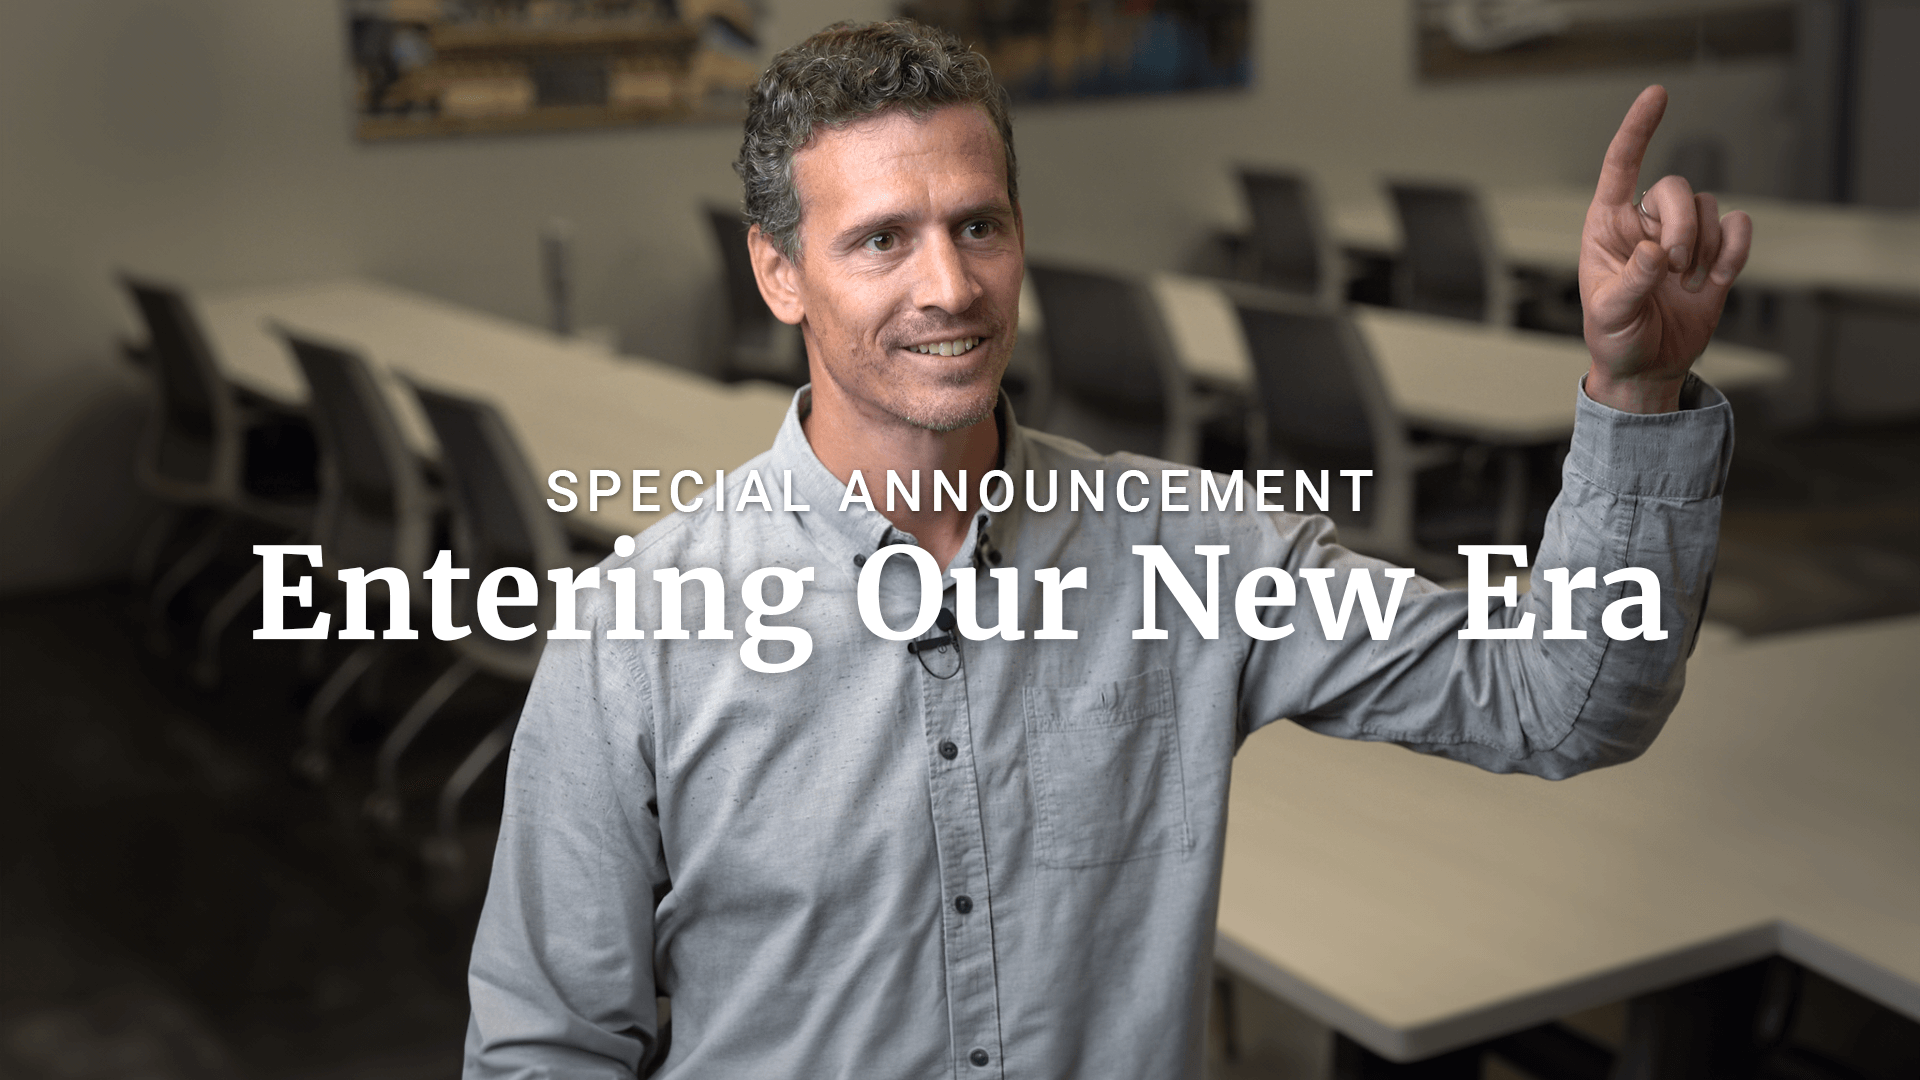 CEO and Founder, Matt Rodak is making an announcement about the future of the brand.